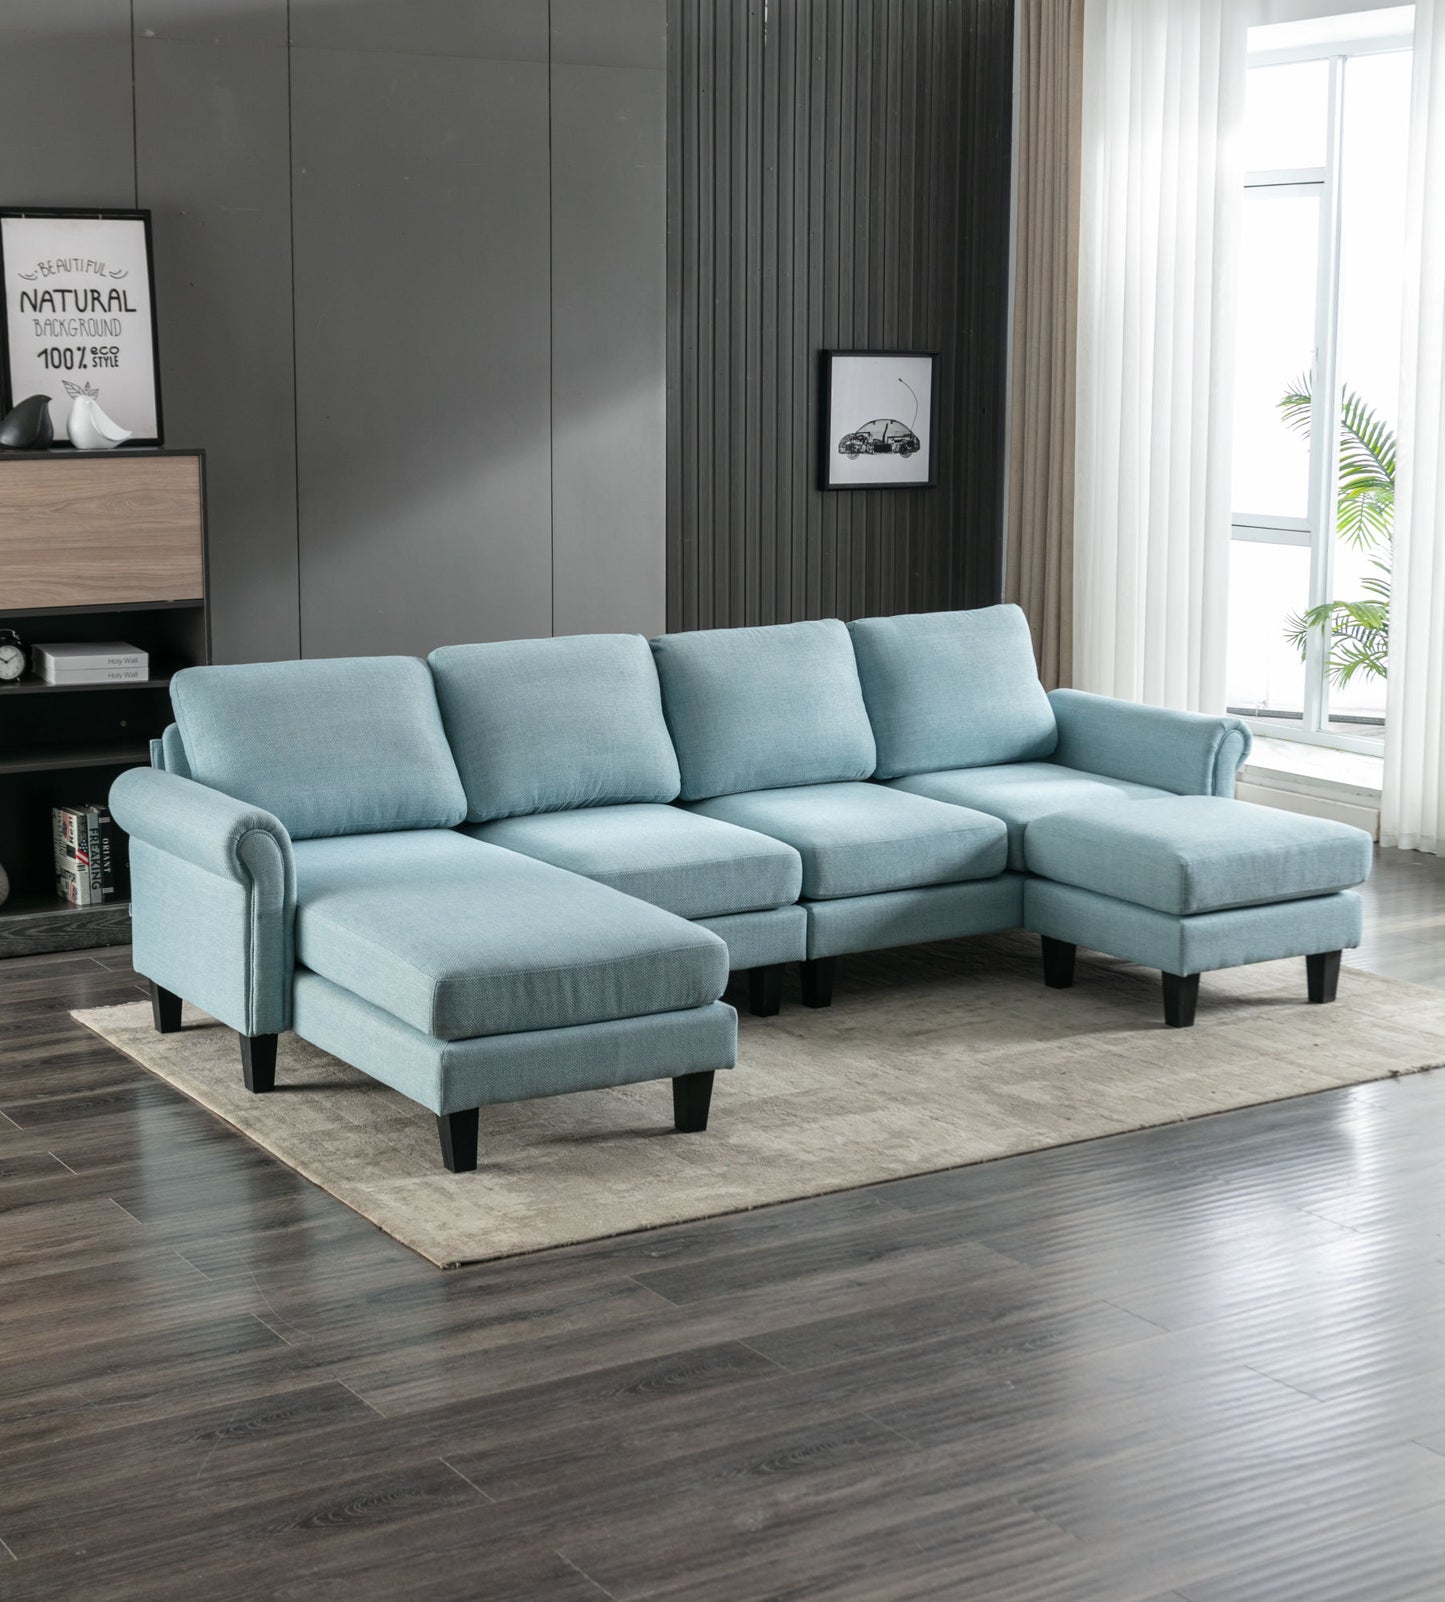 COOLMORE Accent sofa /Living room sofa sectional sofa